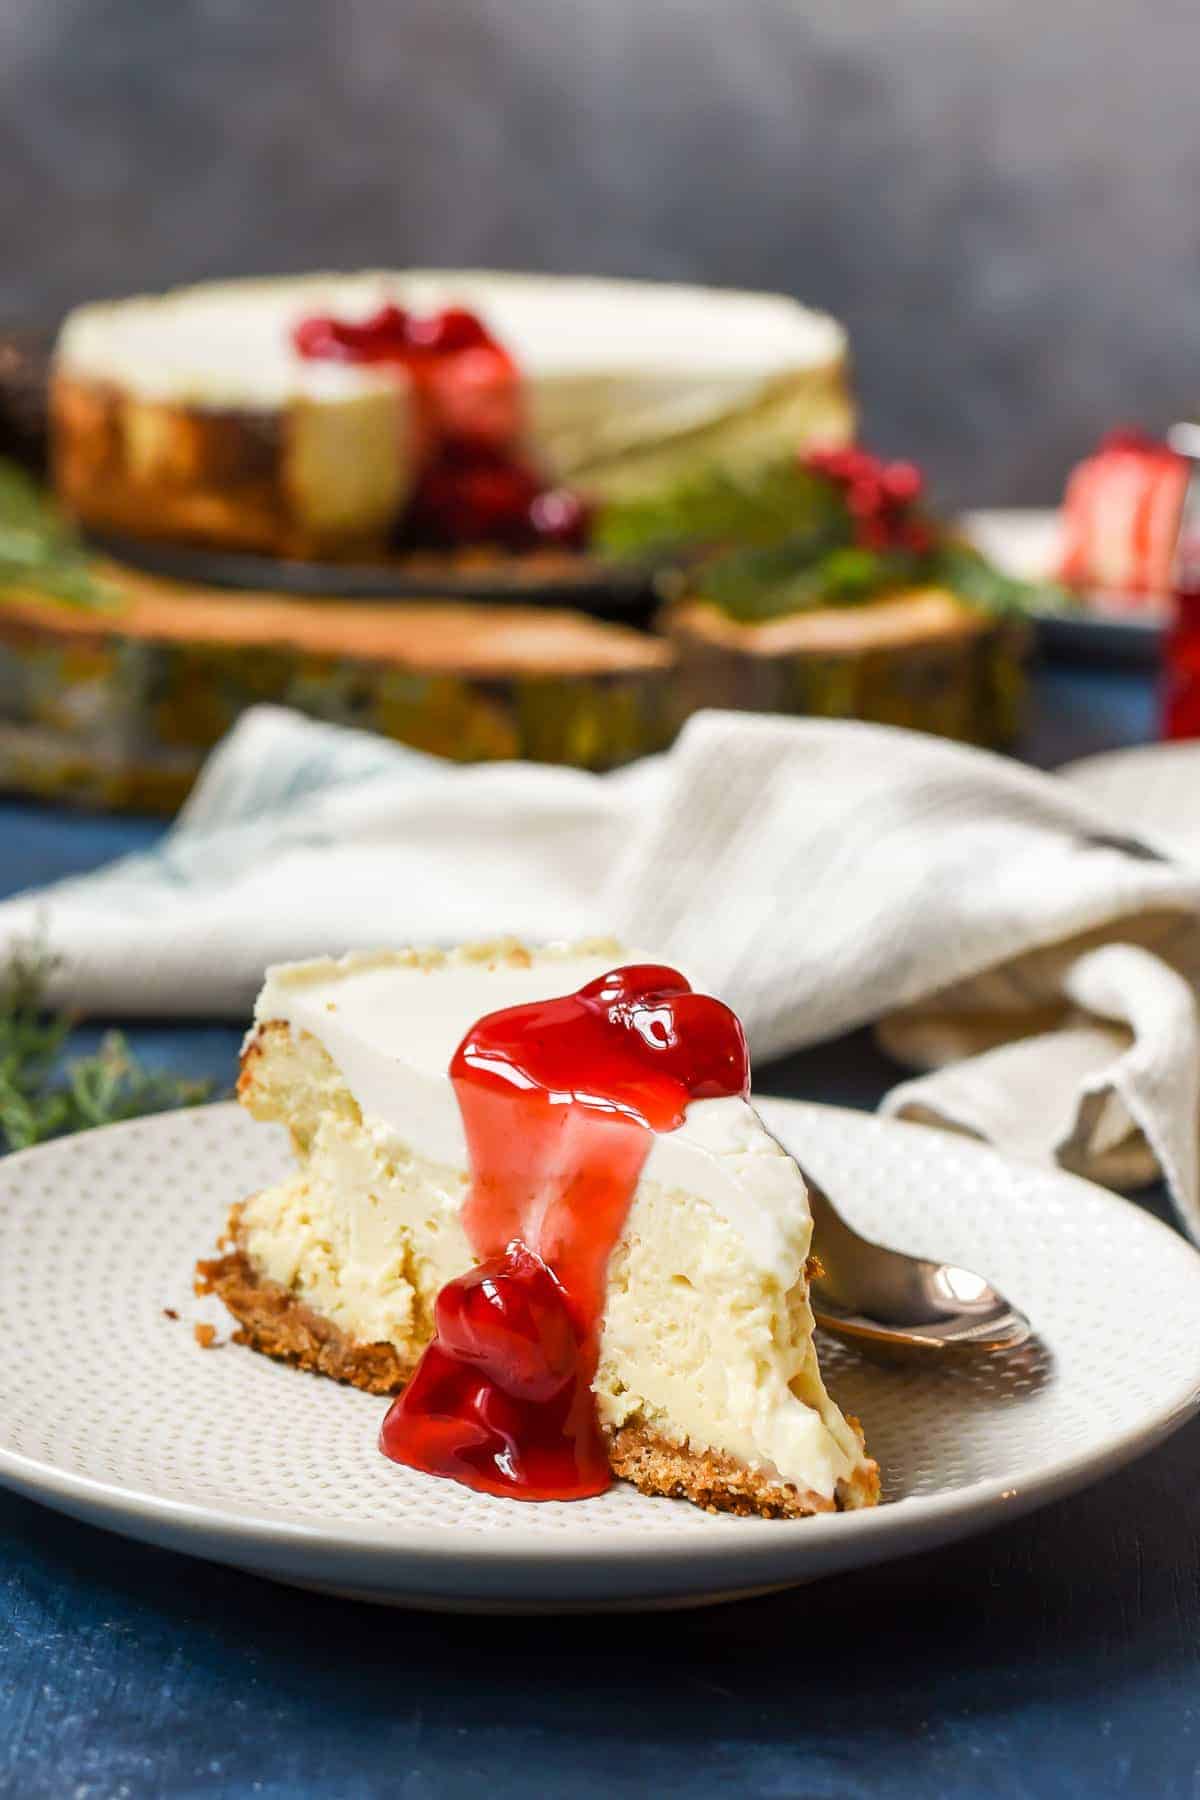 This Sour Cream Cheesecake has a wonderfully light, whipped texture and rich flavor. It's the perfect dessert for any occasion!